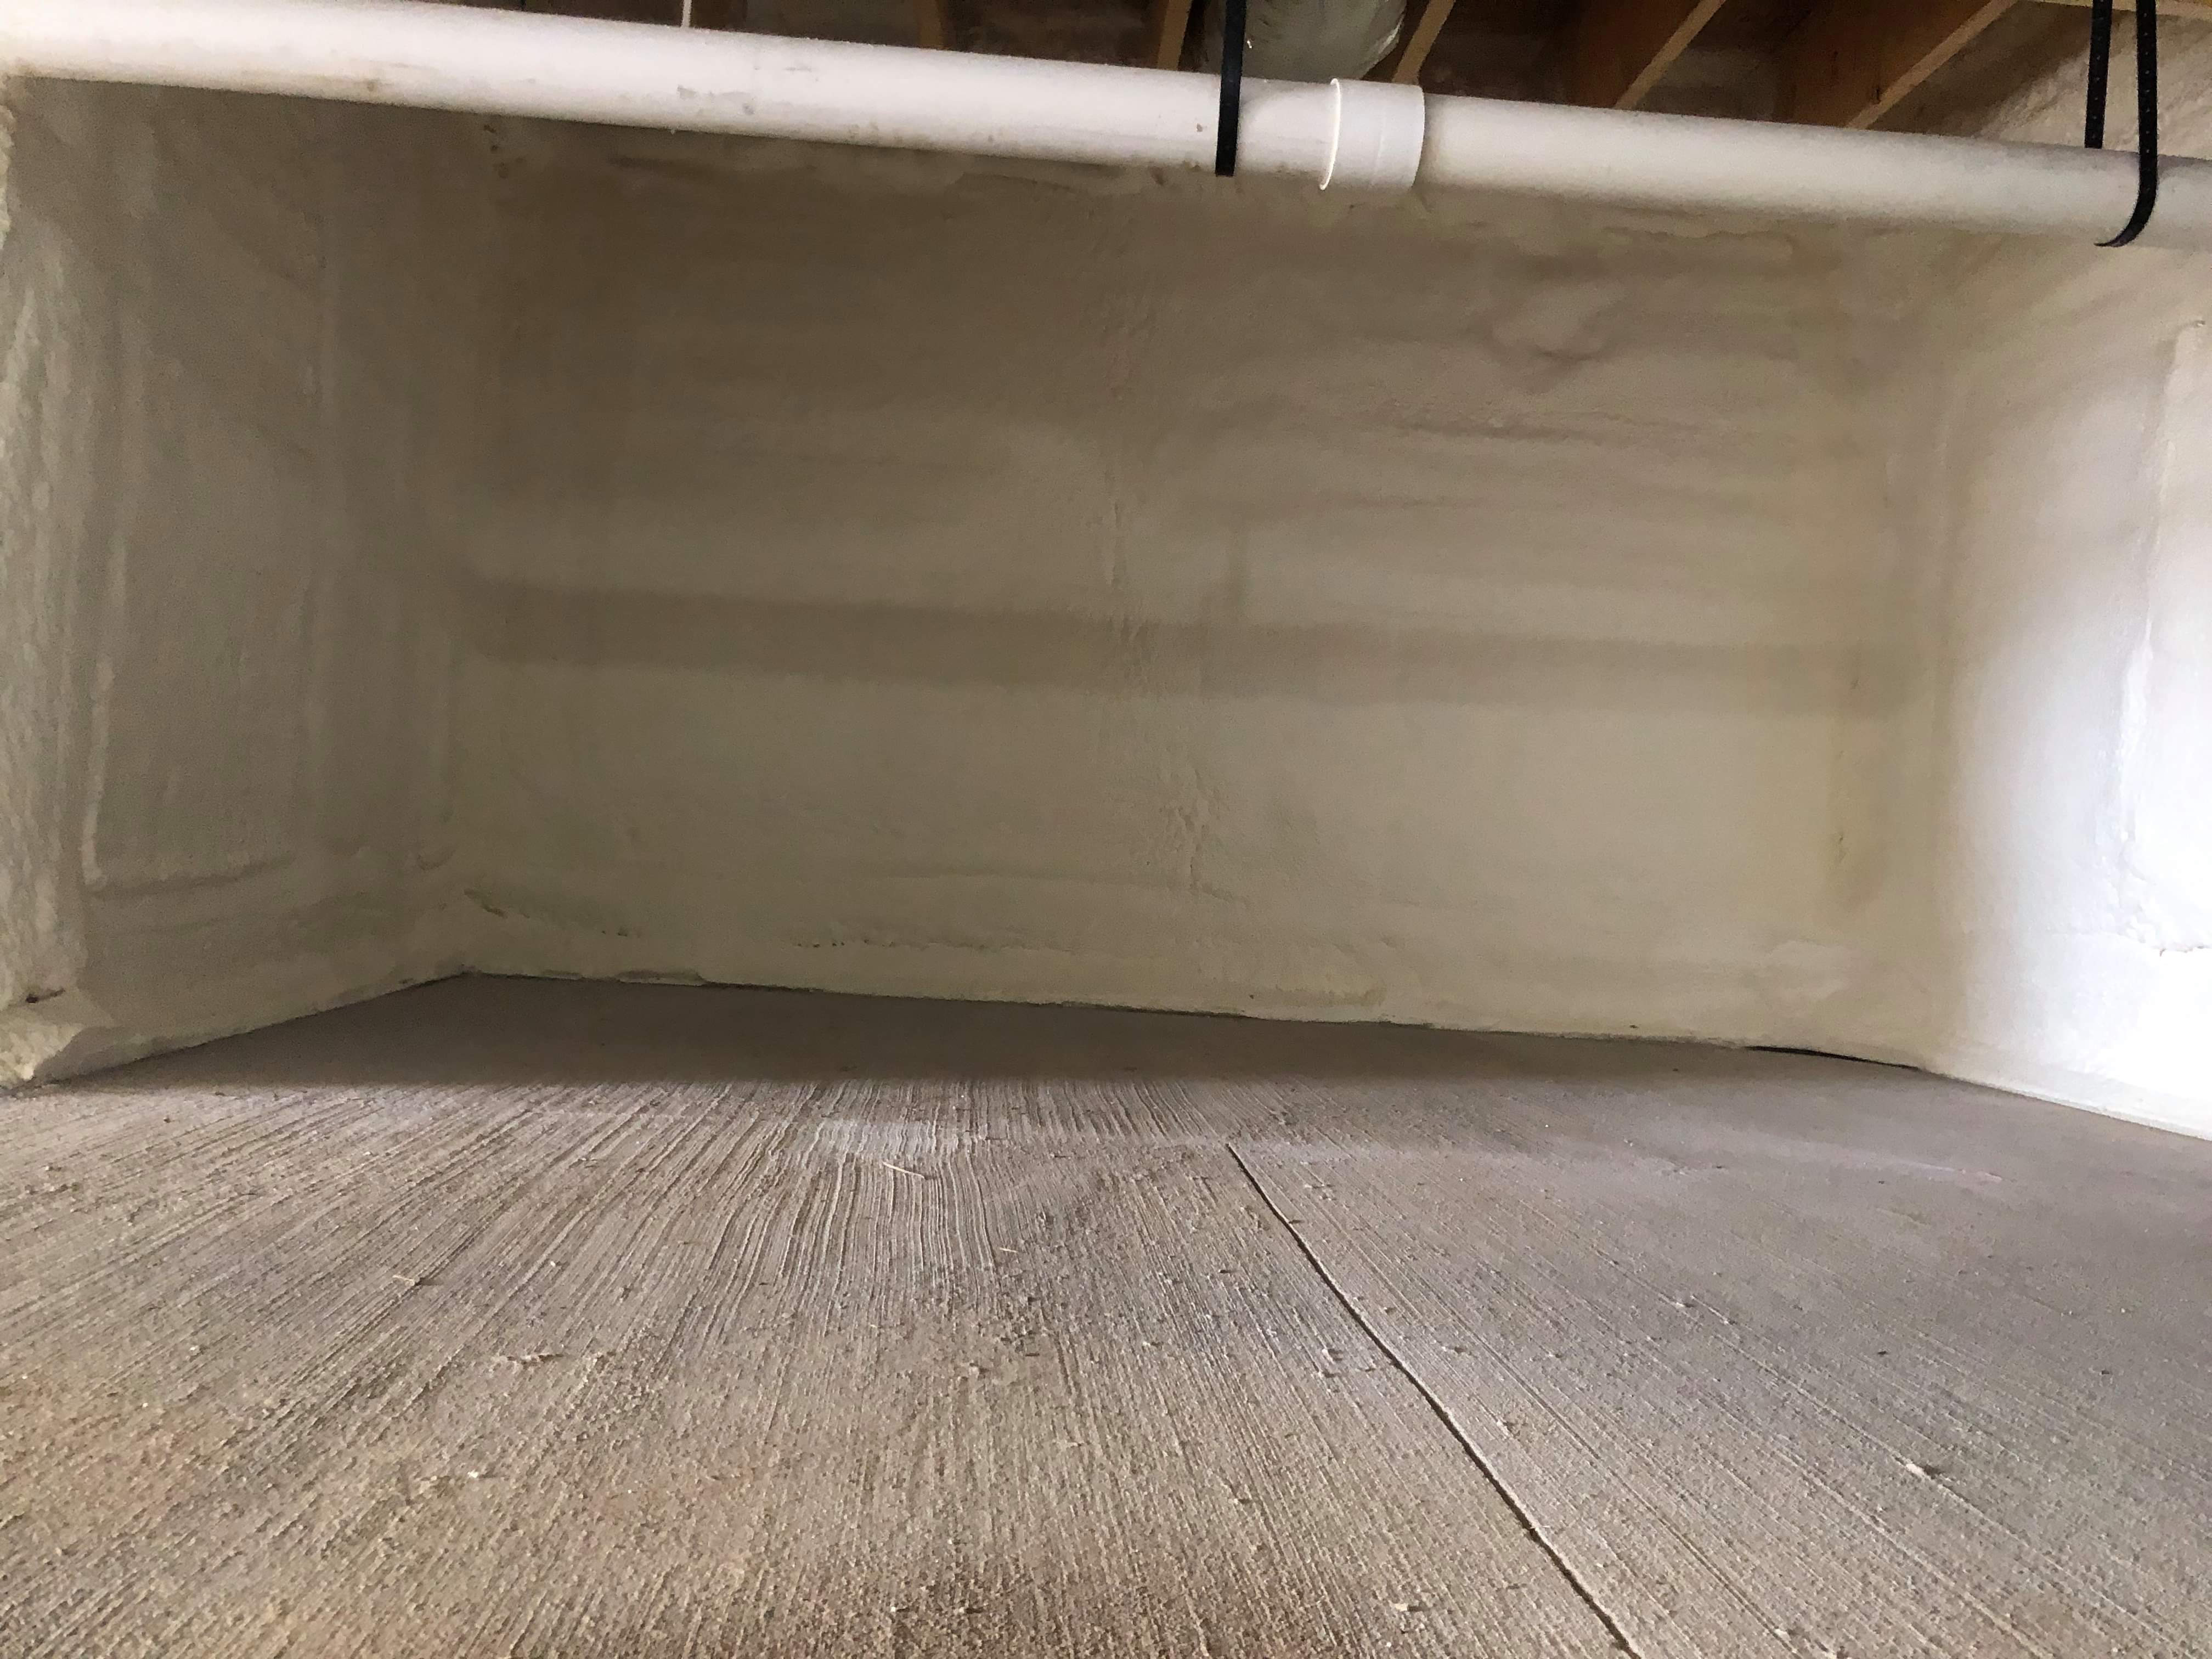 Insulated wall of crawl space